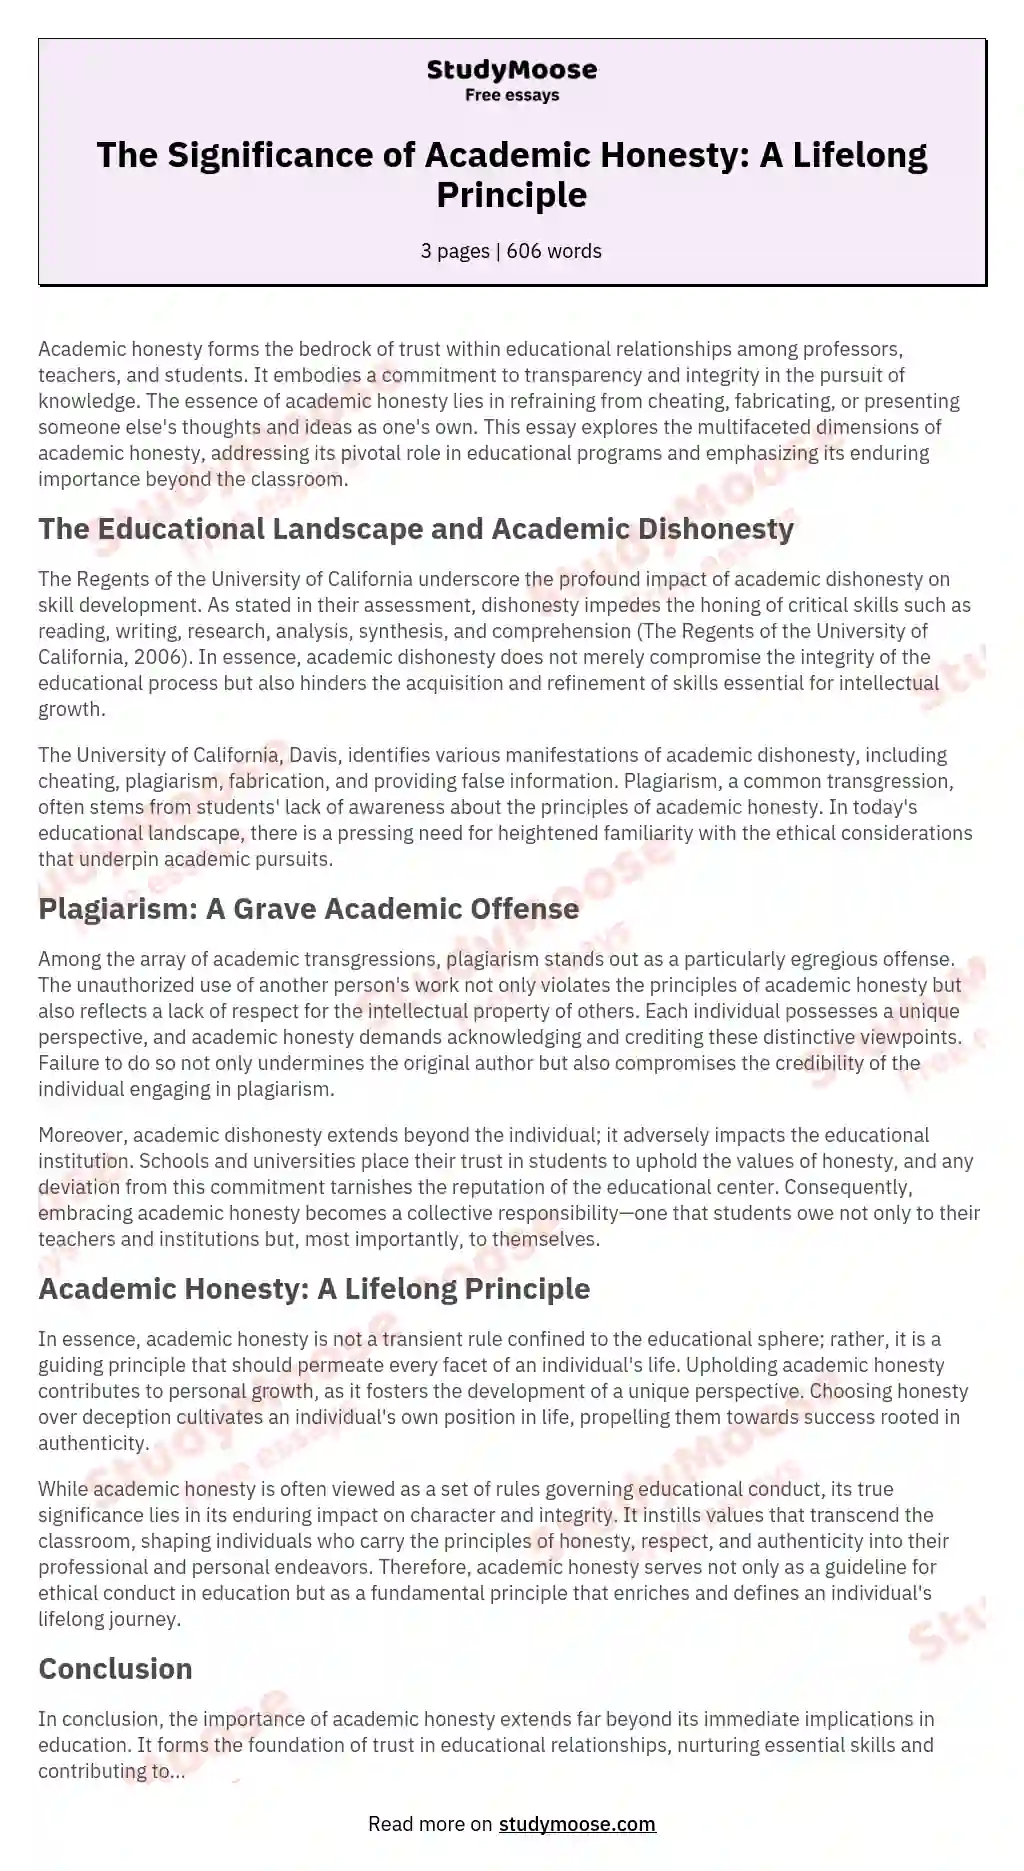 Academic Honesty and Why Plagiarism Is Wrong